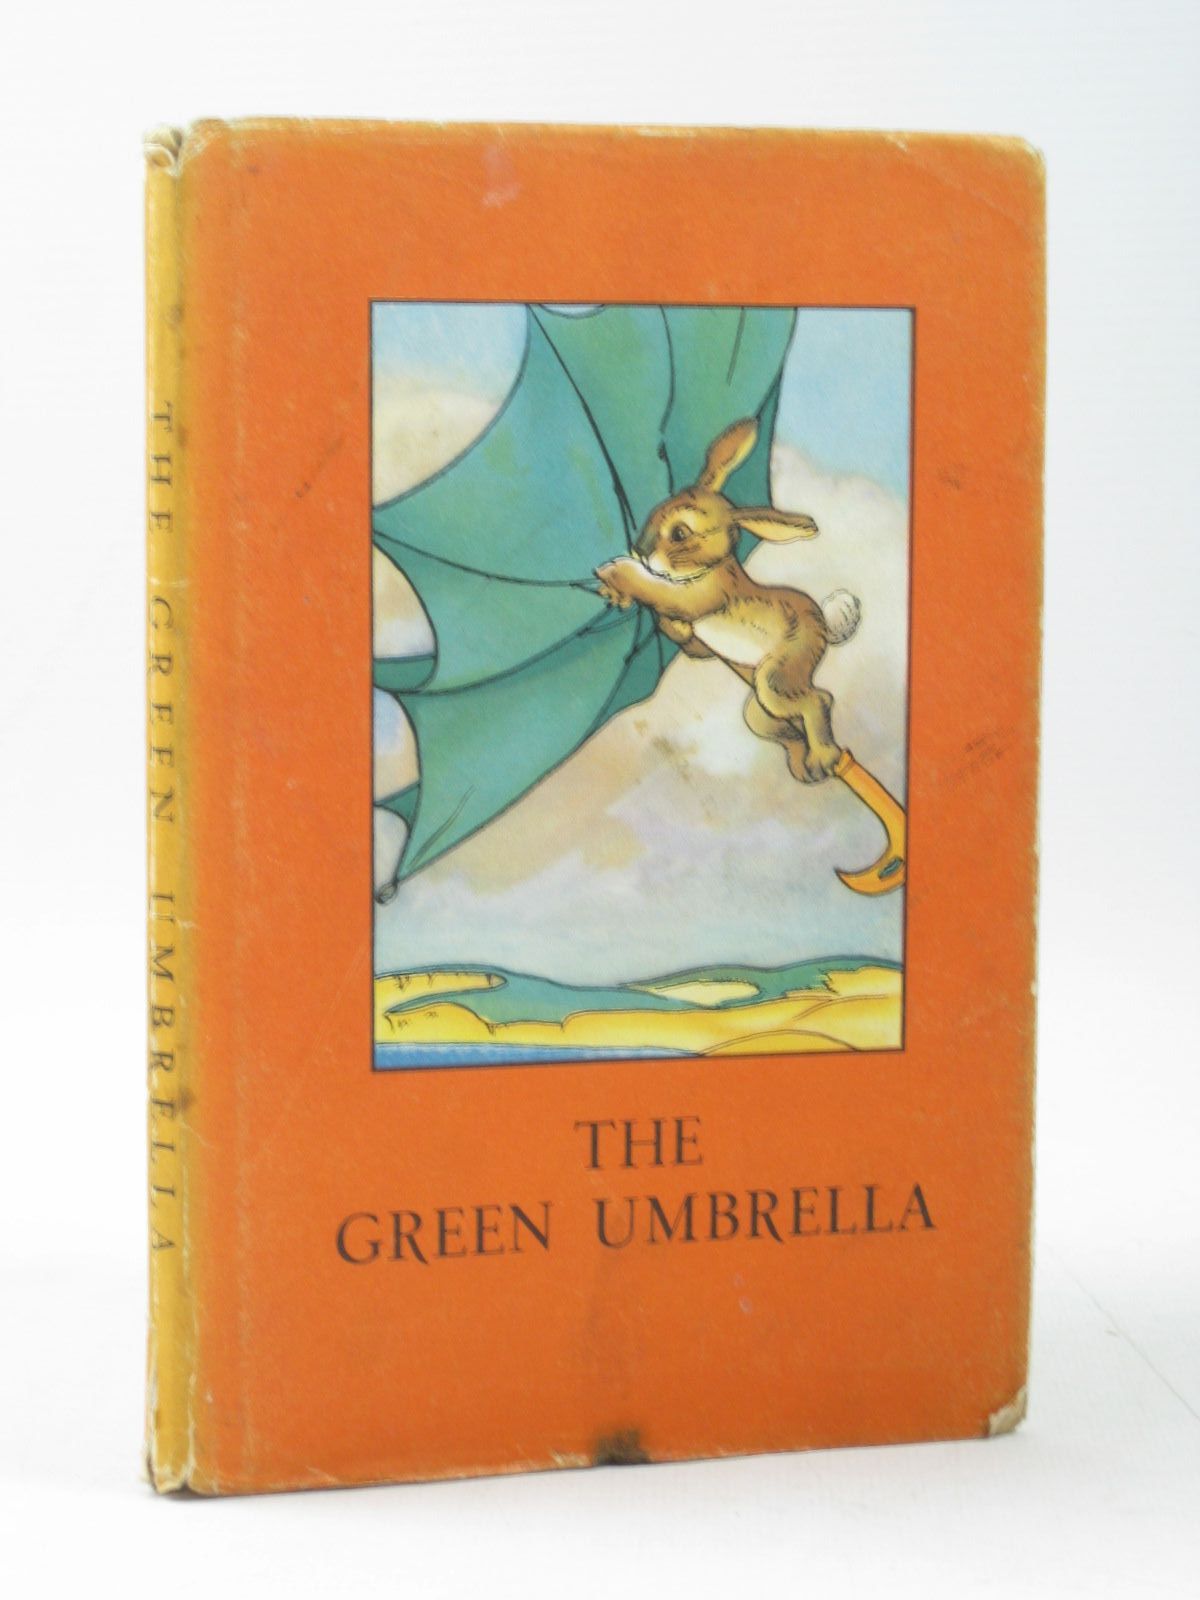 Photo of THE GREEN UMBRELLA written by Perring, W.
Macgregor, A.J. illustrated by Macgregor, A.J. published by Wills & Hepworth Ltd. (STOCK CODE: 1314276)  for sale by Stella & Rose's Books